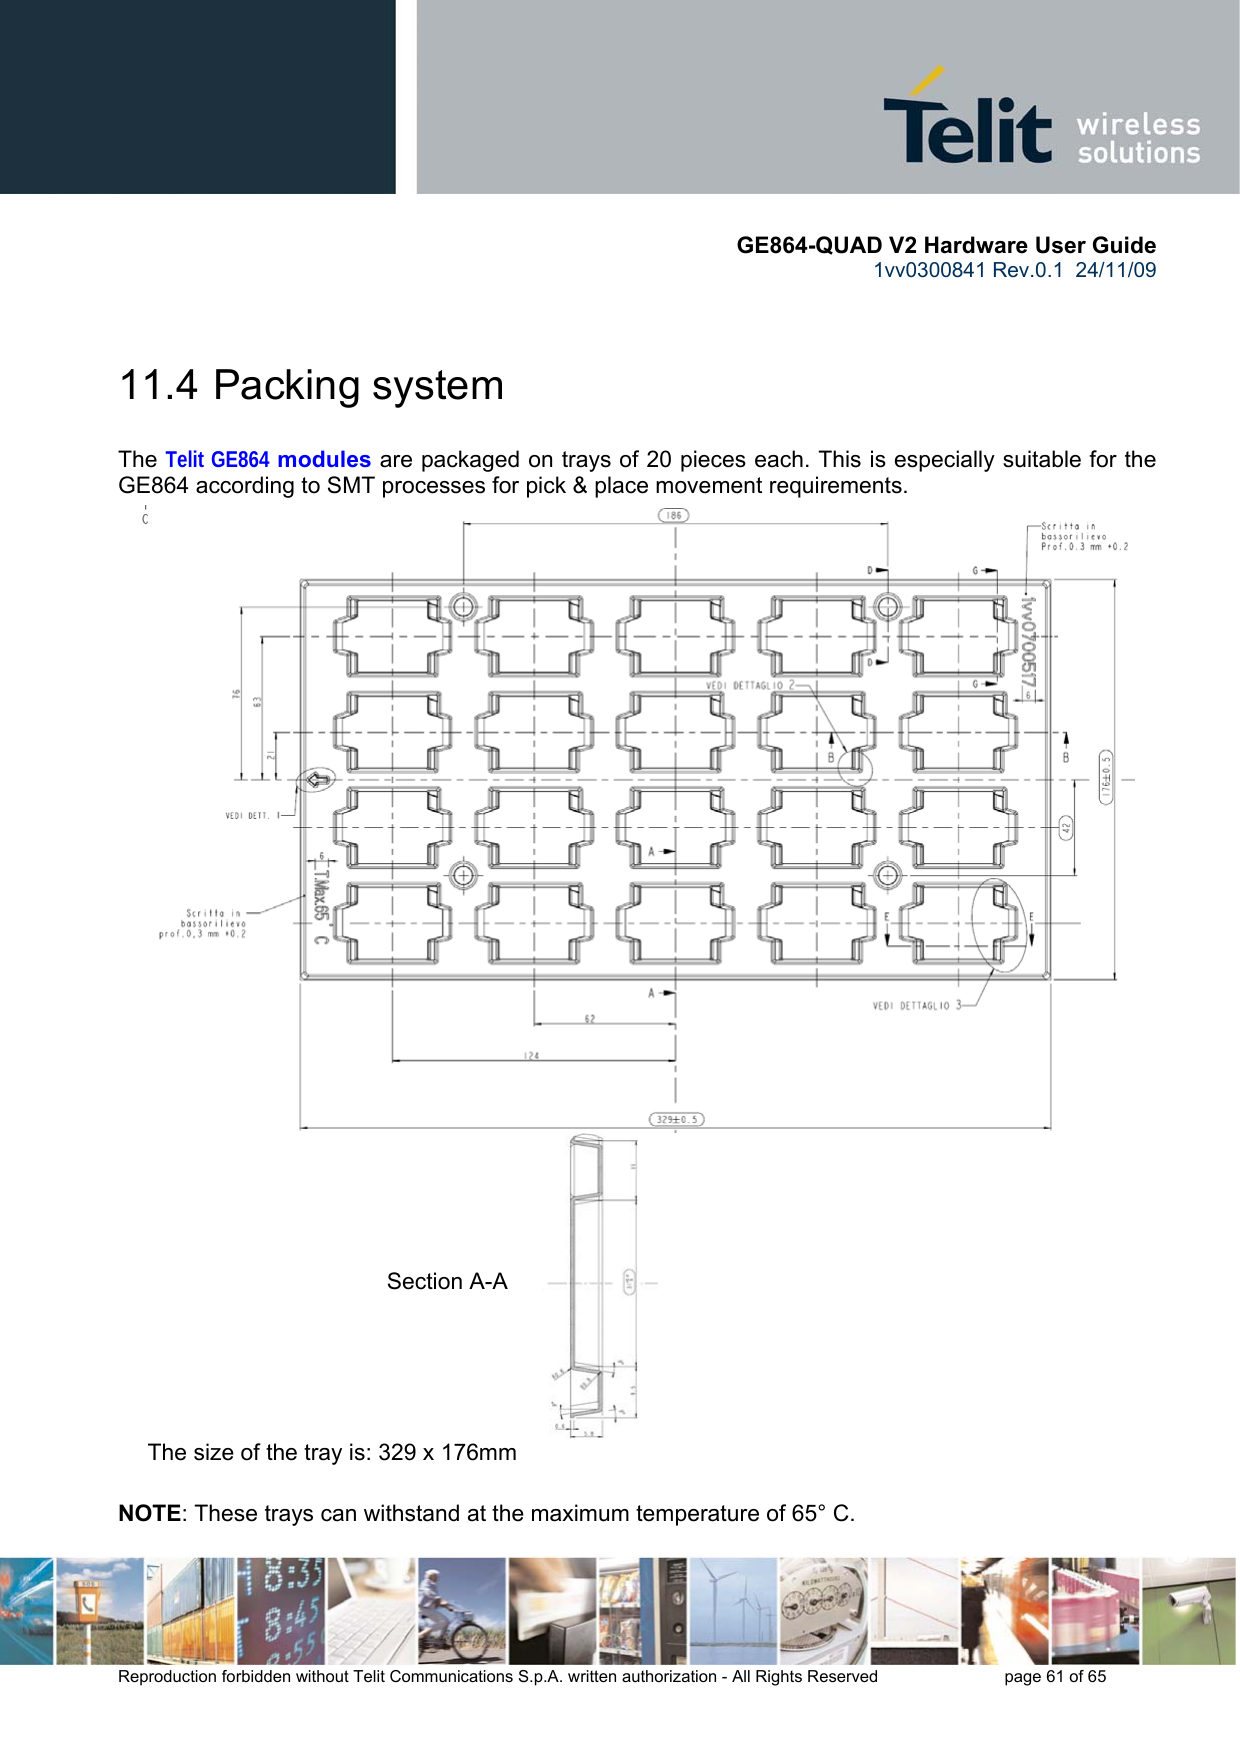       GE864-QUAD V2 Hardware User Guide 1vv0300841 Rev.0.1  24/11/09      Reproduction forbidden without Telit Communications S.p.A. written authorization - All Rights Reserved    page 61 of 65   11.4  Packing system  The Telit GE864 modules are packaged on trays of 20 pieces each. This is especially suitable for the GE864 according to SMT processes for pick &amp; place movement requirements.  The size of the tray is: 329 x 176mm  NOTE: These trays can withstand at the maximum temperature of 65° C. Section A-A 